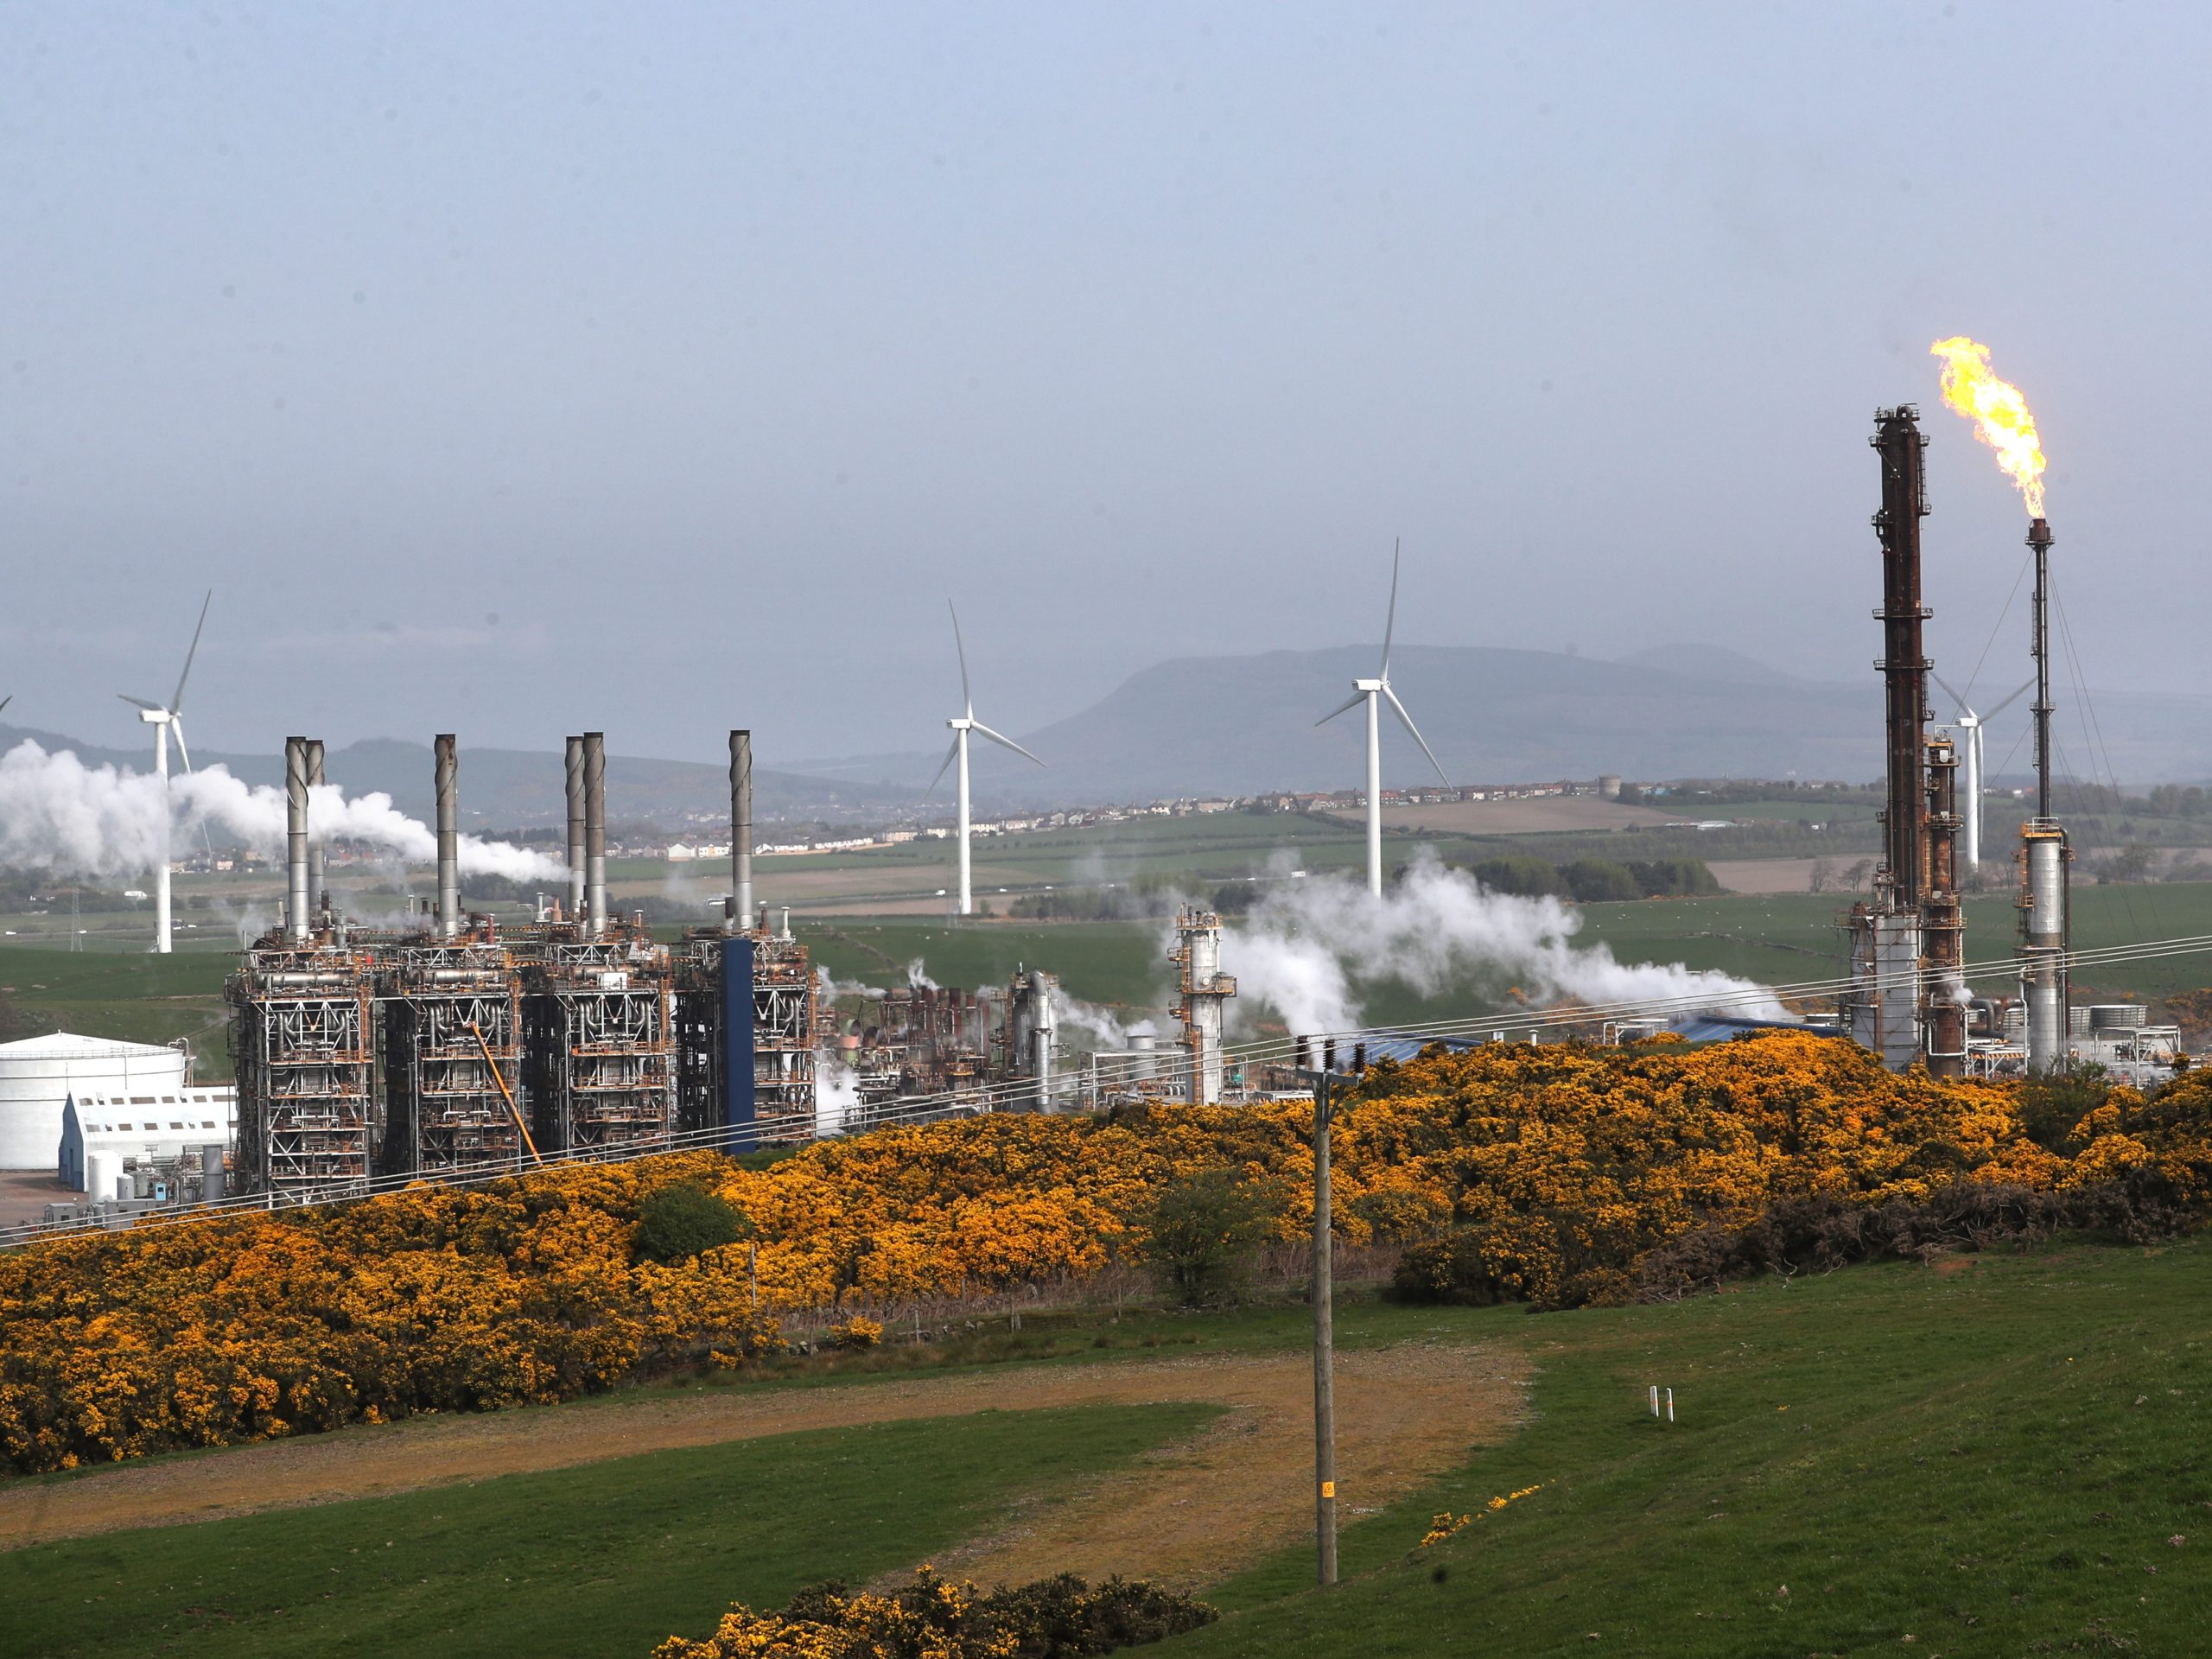 First Minister pressed on flaring at Mossmorran chemical plant